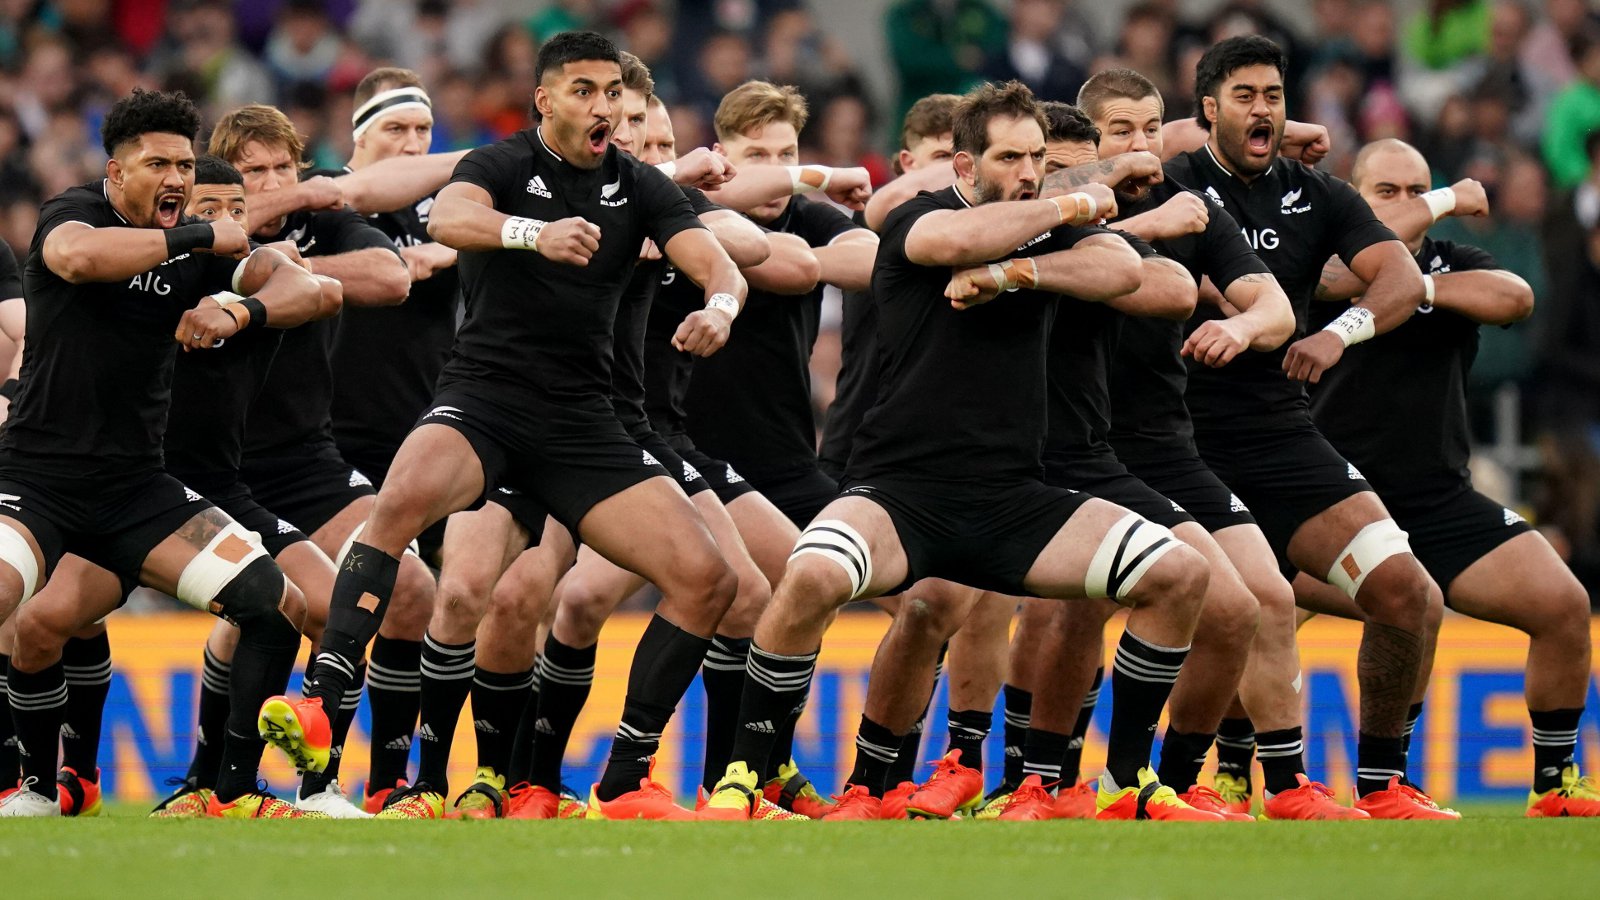 New Zealand's rugby team